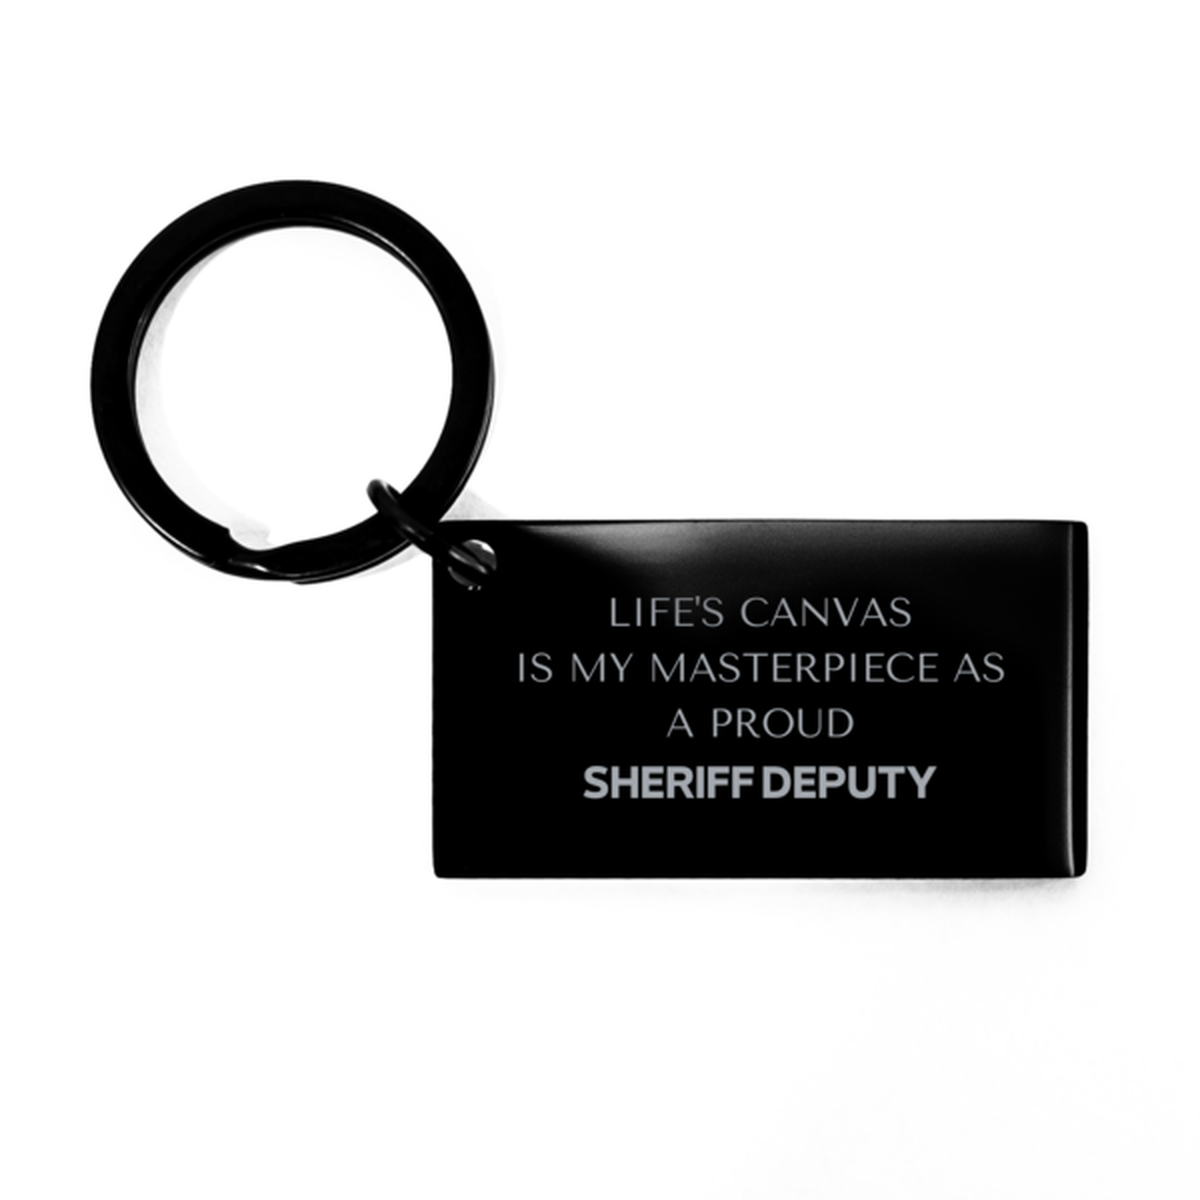 Proud Sheriff Deputy Gifts, Life's canvas is my masterpiece, Epic Birthday Christmas Unique Keychain For Sheriff Deputy, Coworkers, Men, Women, Friends